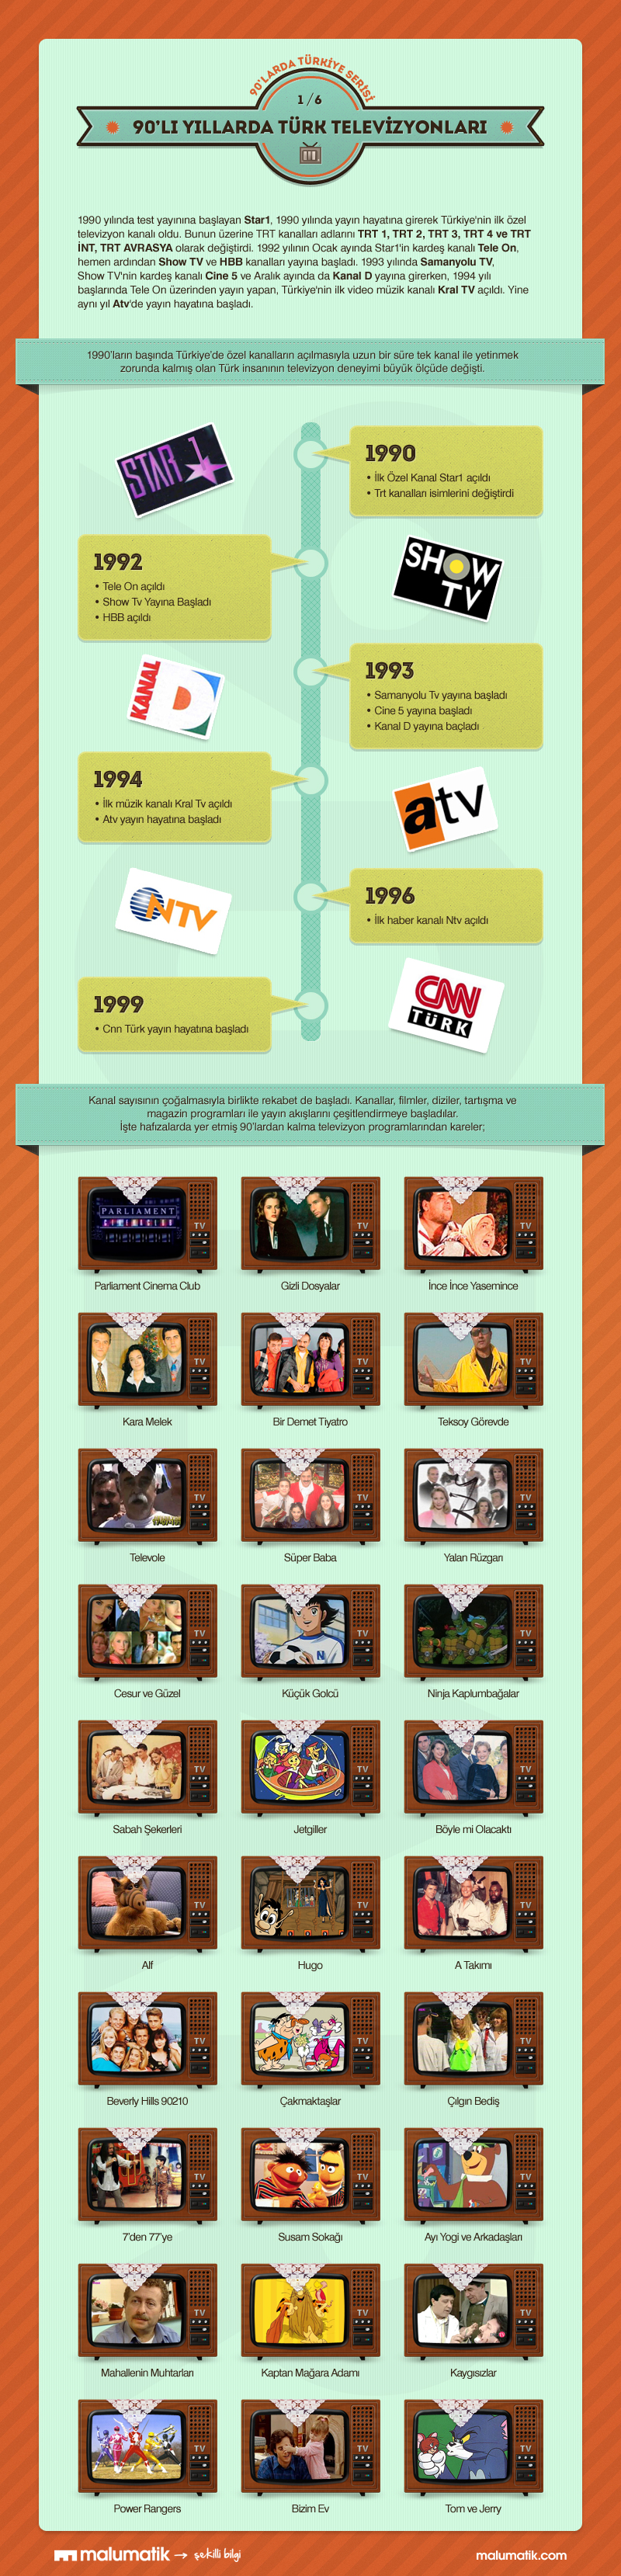 Infographic Turkish Televisions in 90s